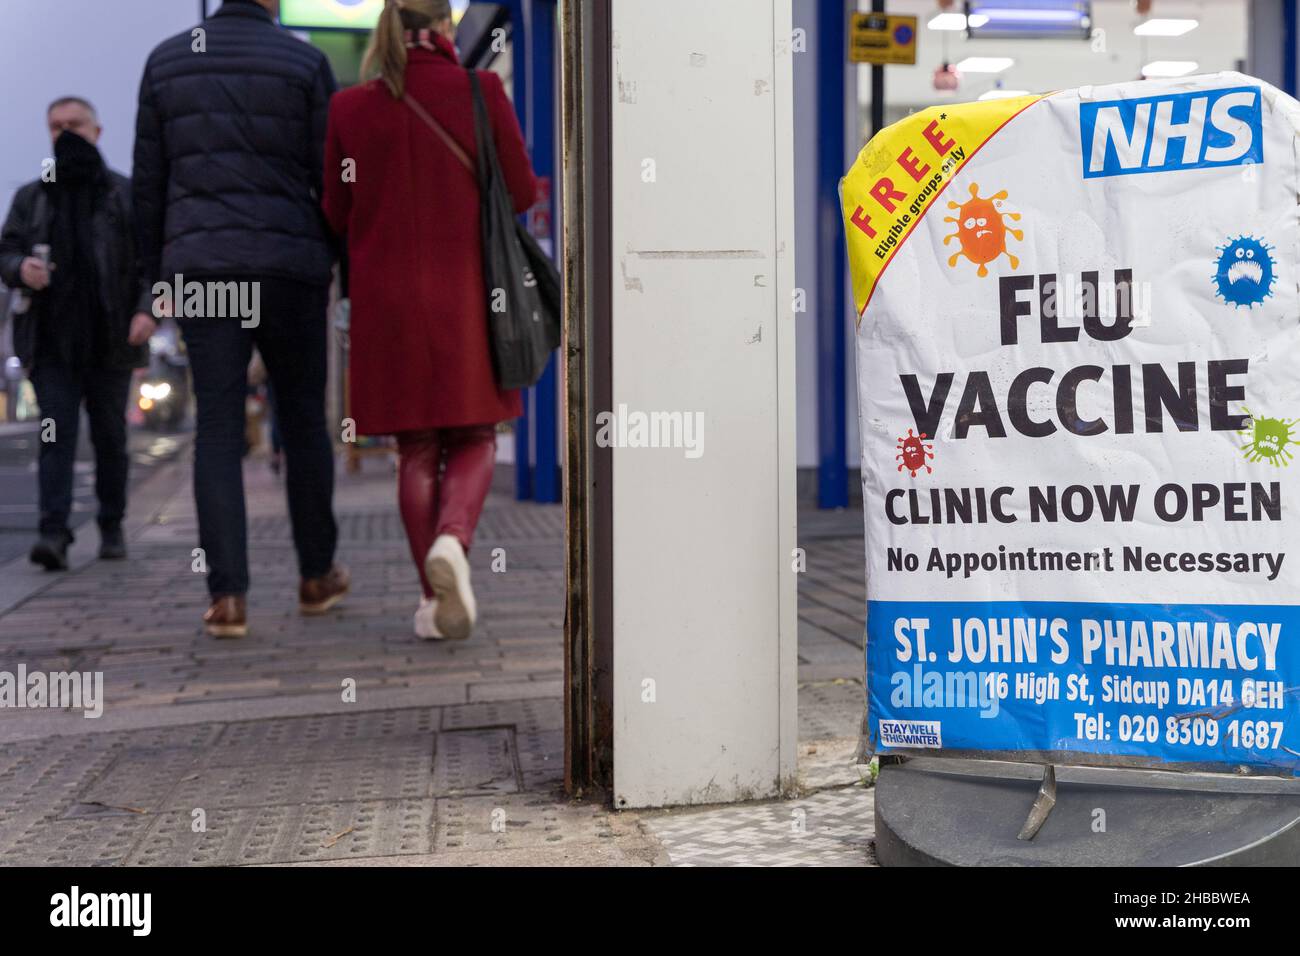 Christmas shoppers walk past Flu Vaccine poster offering free flu jab to those eligible people at Sidcup pharmacy London England Stock Photo